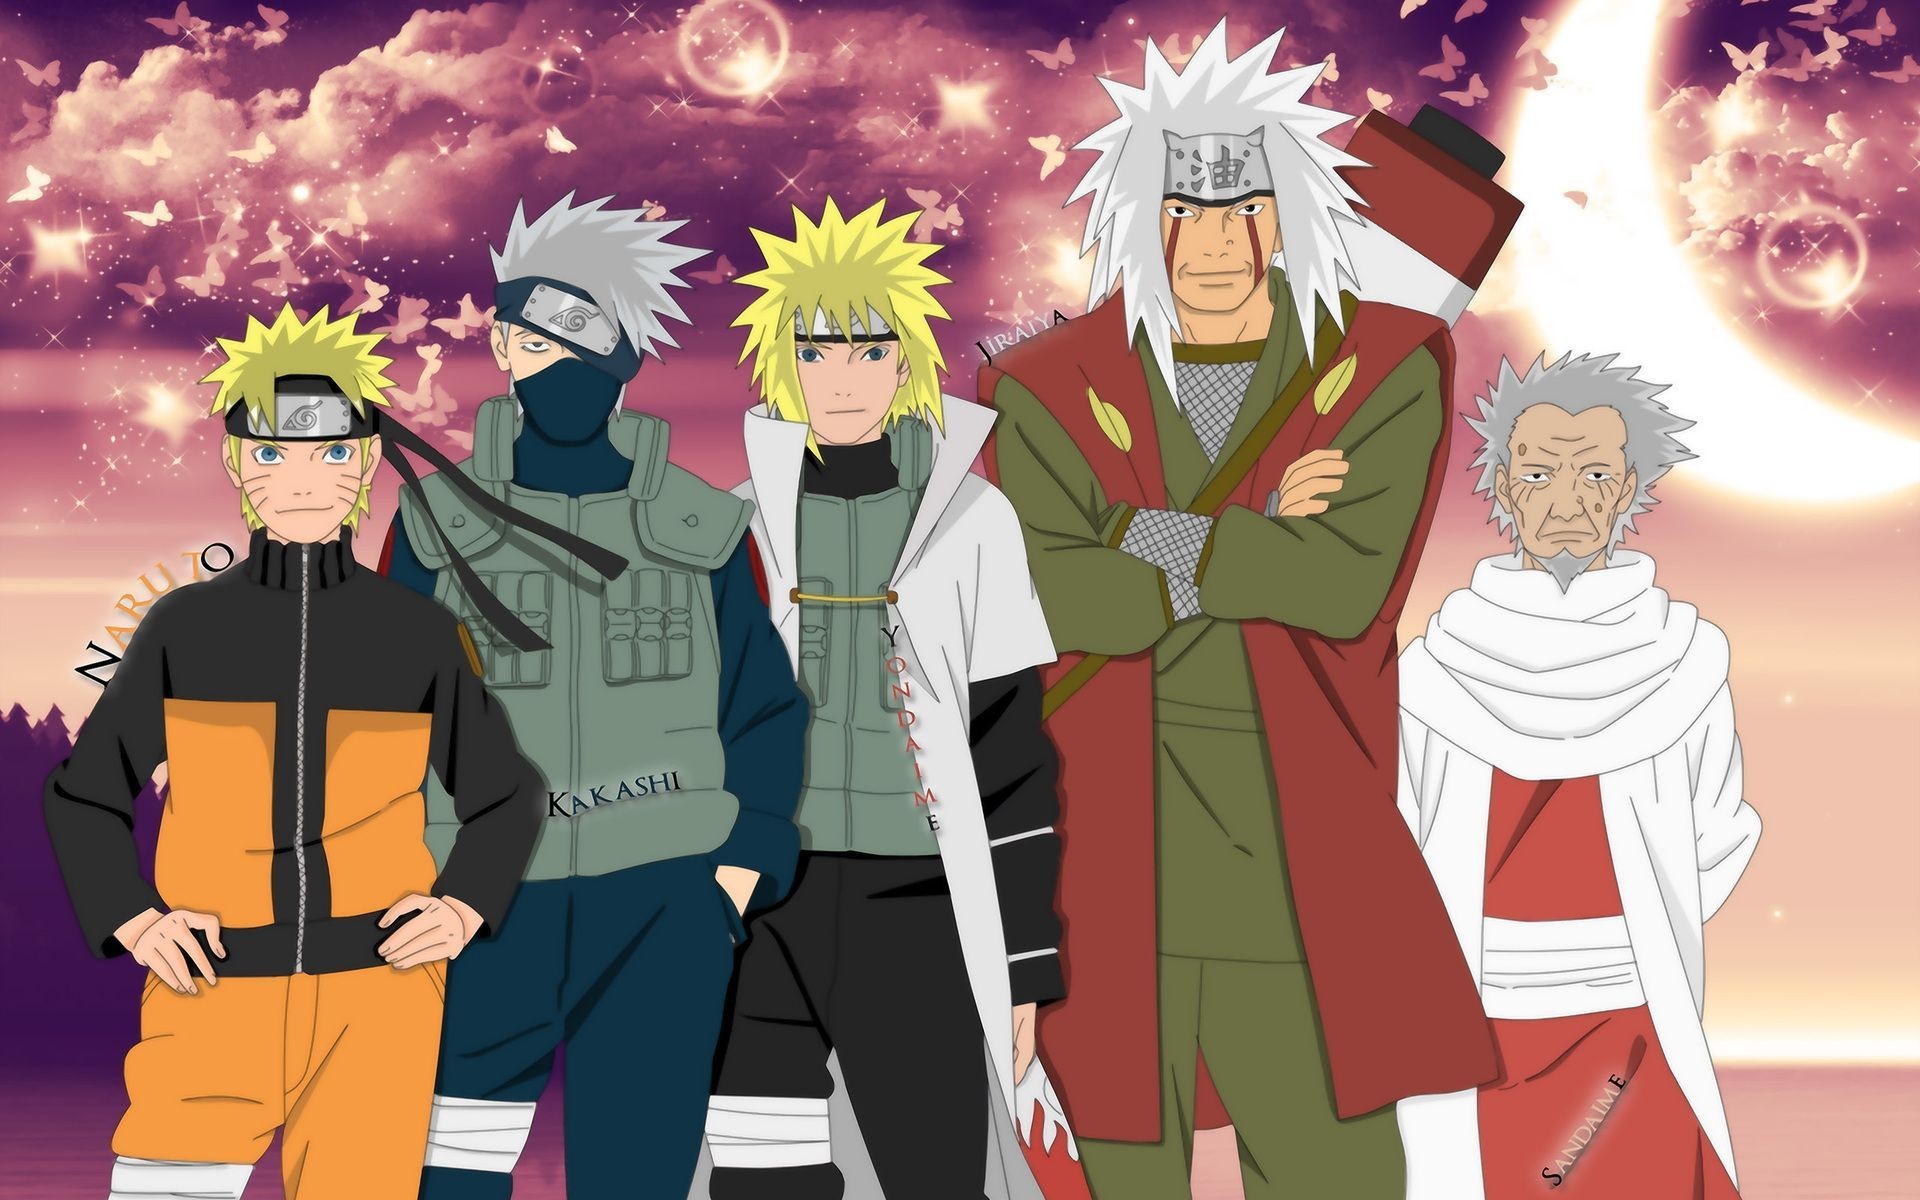 Simple Naruto 7th Hokage Wallpaper Naruto Shippuden Shippuden Chibi Naruto  Wallpaper Chibi PNG Image With Transparent Background  TOPpng